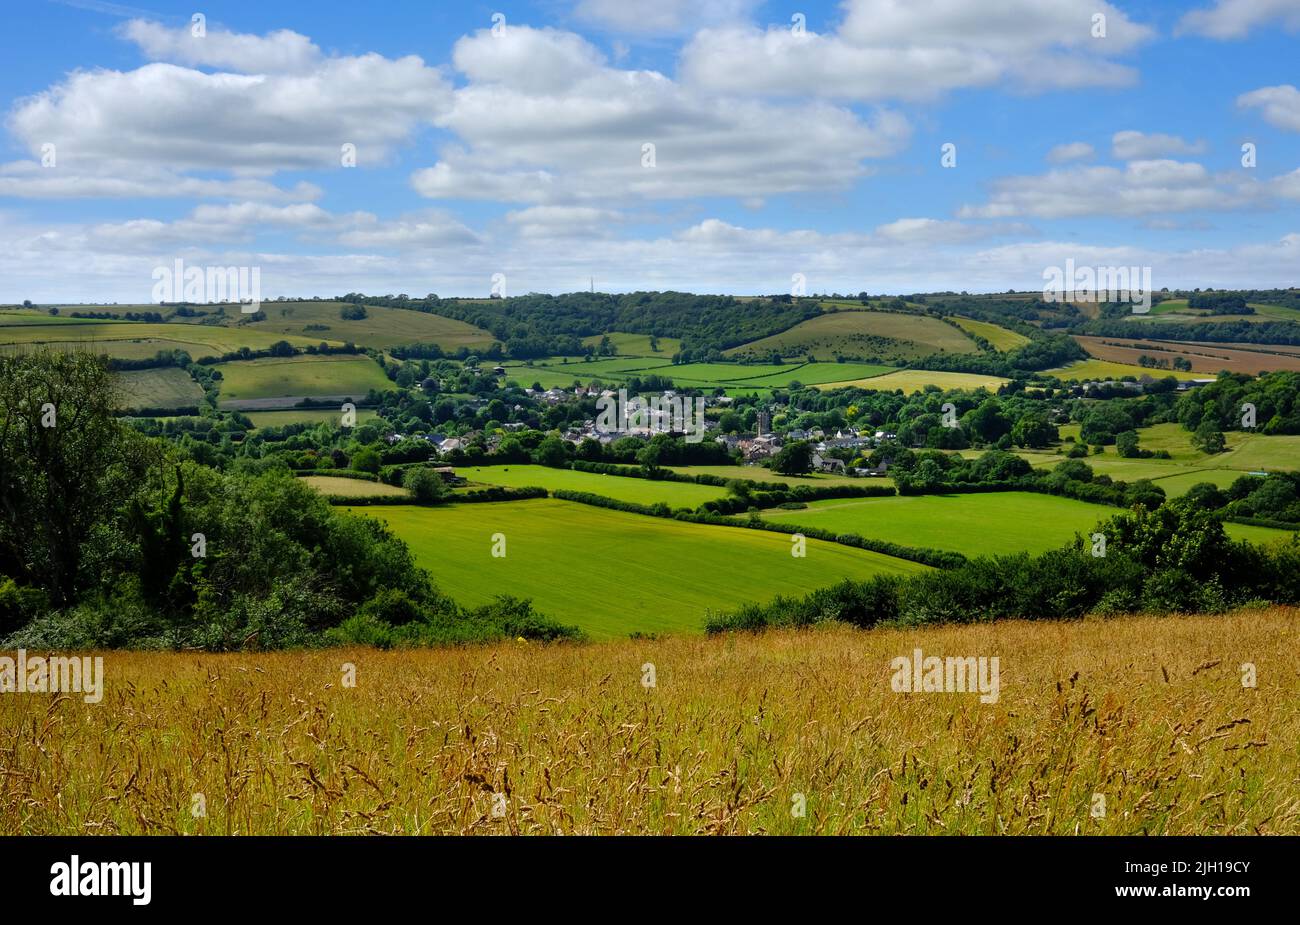 Drone aerial view of Cerne Abbas village and downs countryside, Dorset, England Stock Photo